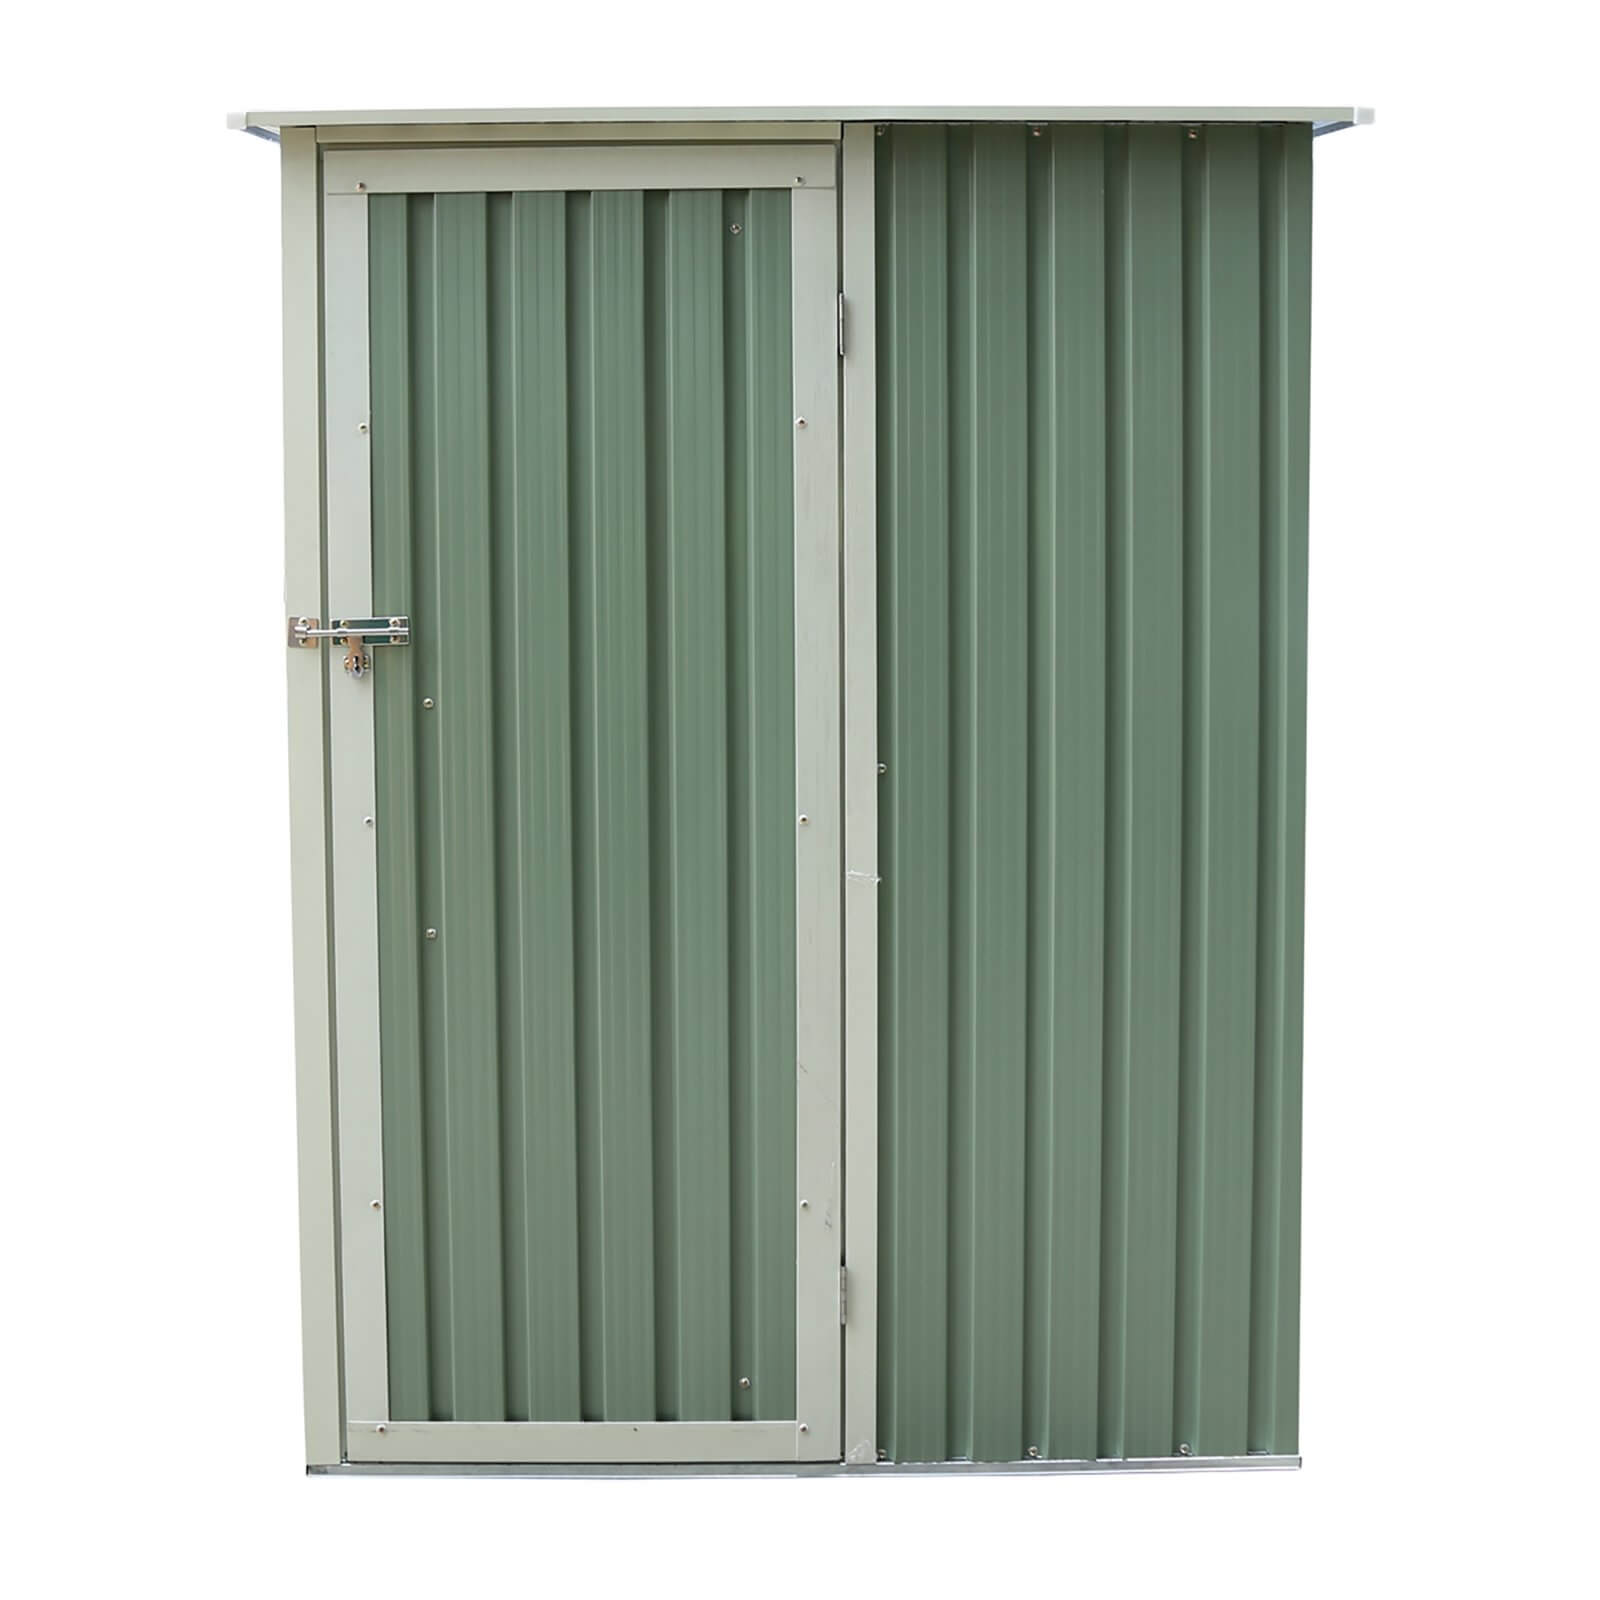 Charles Bentley 4.7ft x 3ft Green Metal Storage Shed